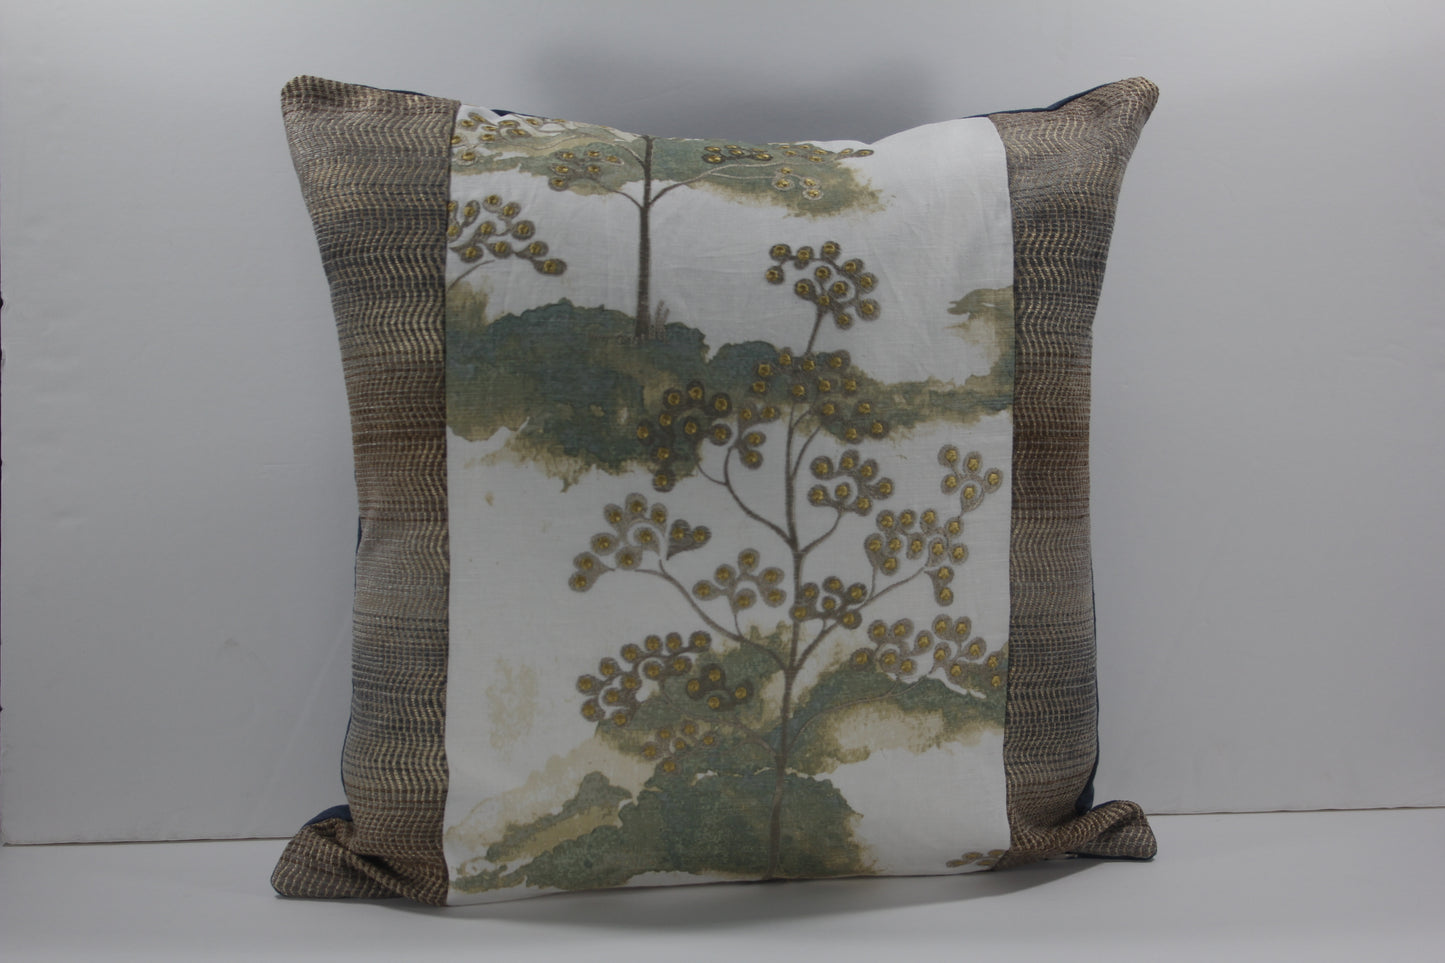 Ann Gish's Avalon with Ombre Panels 20” pillow cover